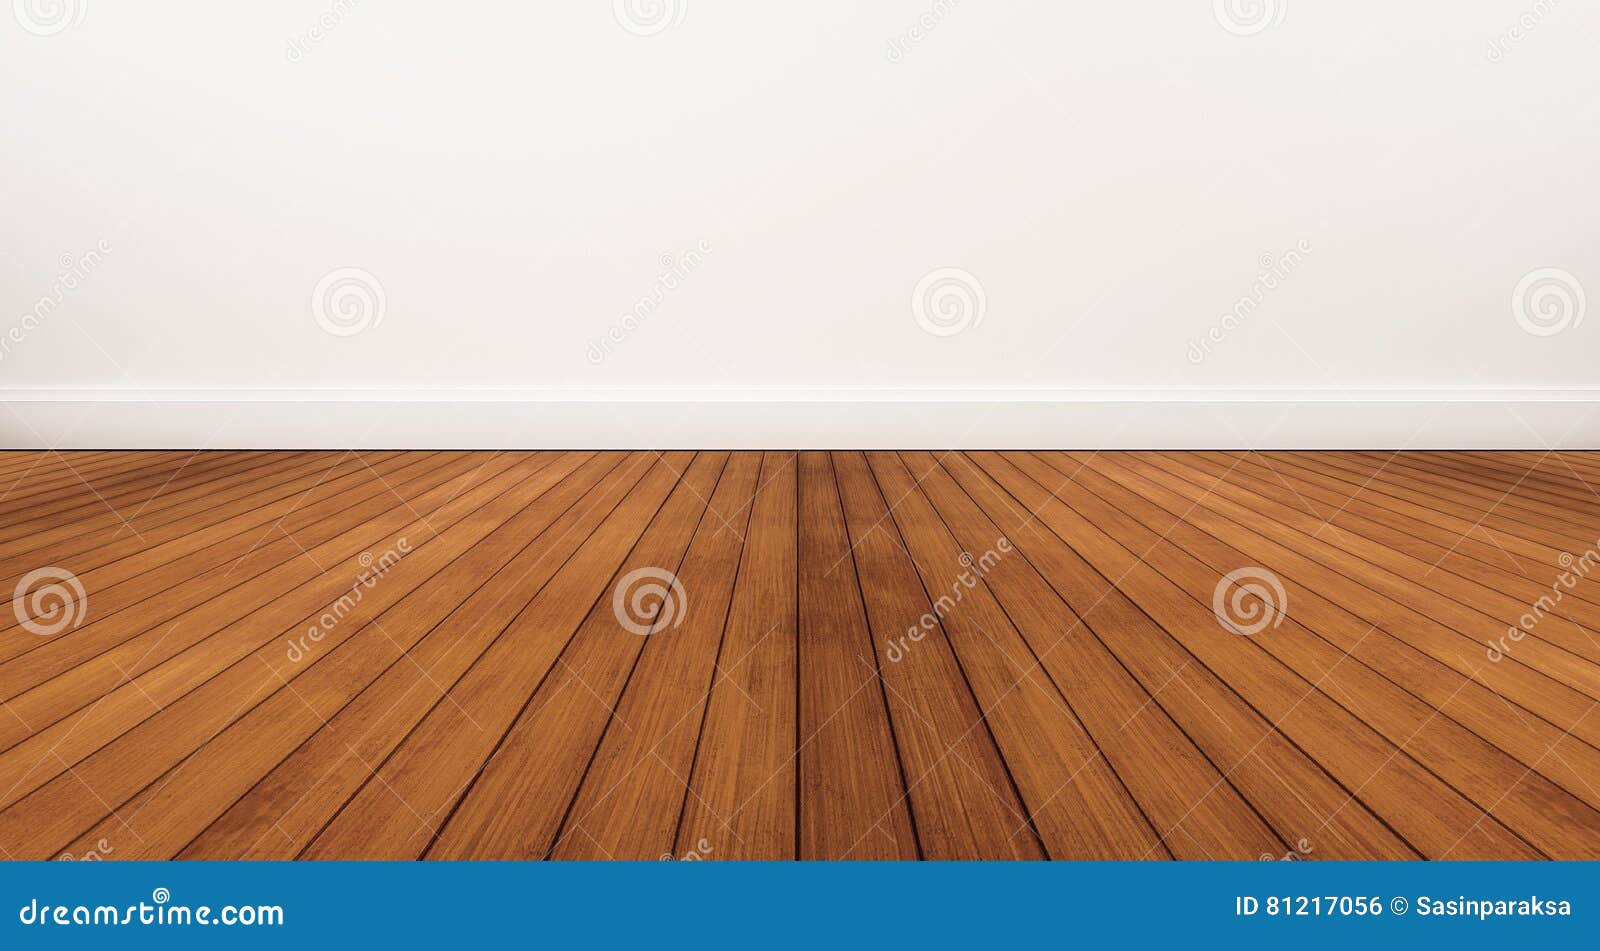 wooden floor and white wall